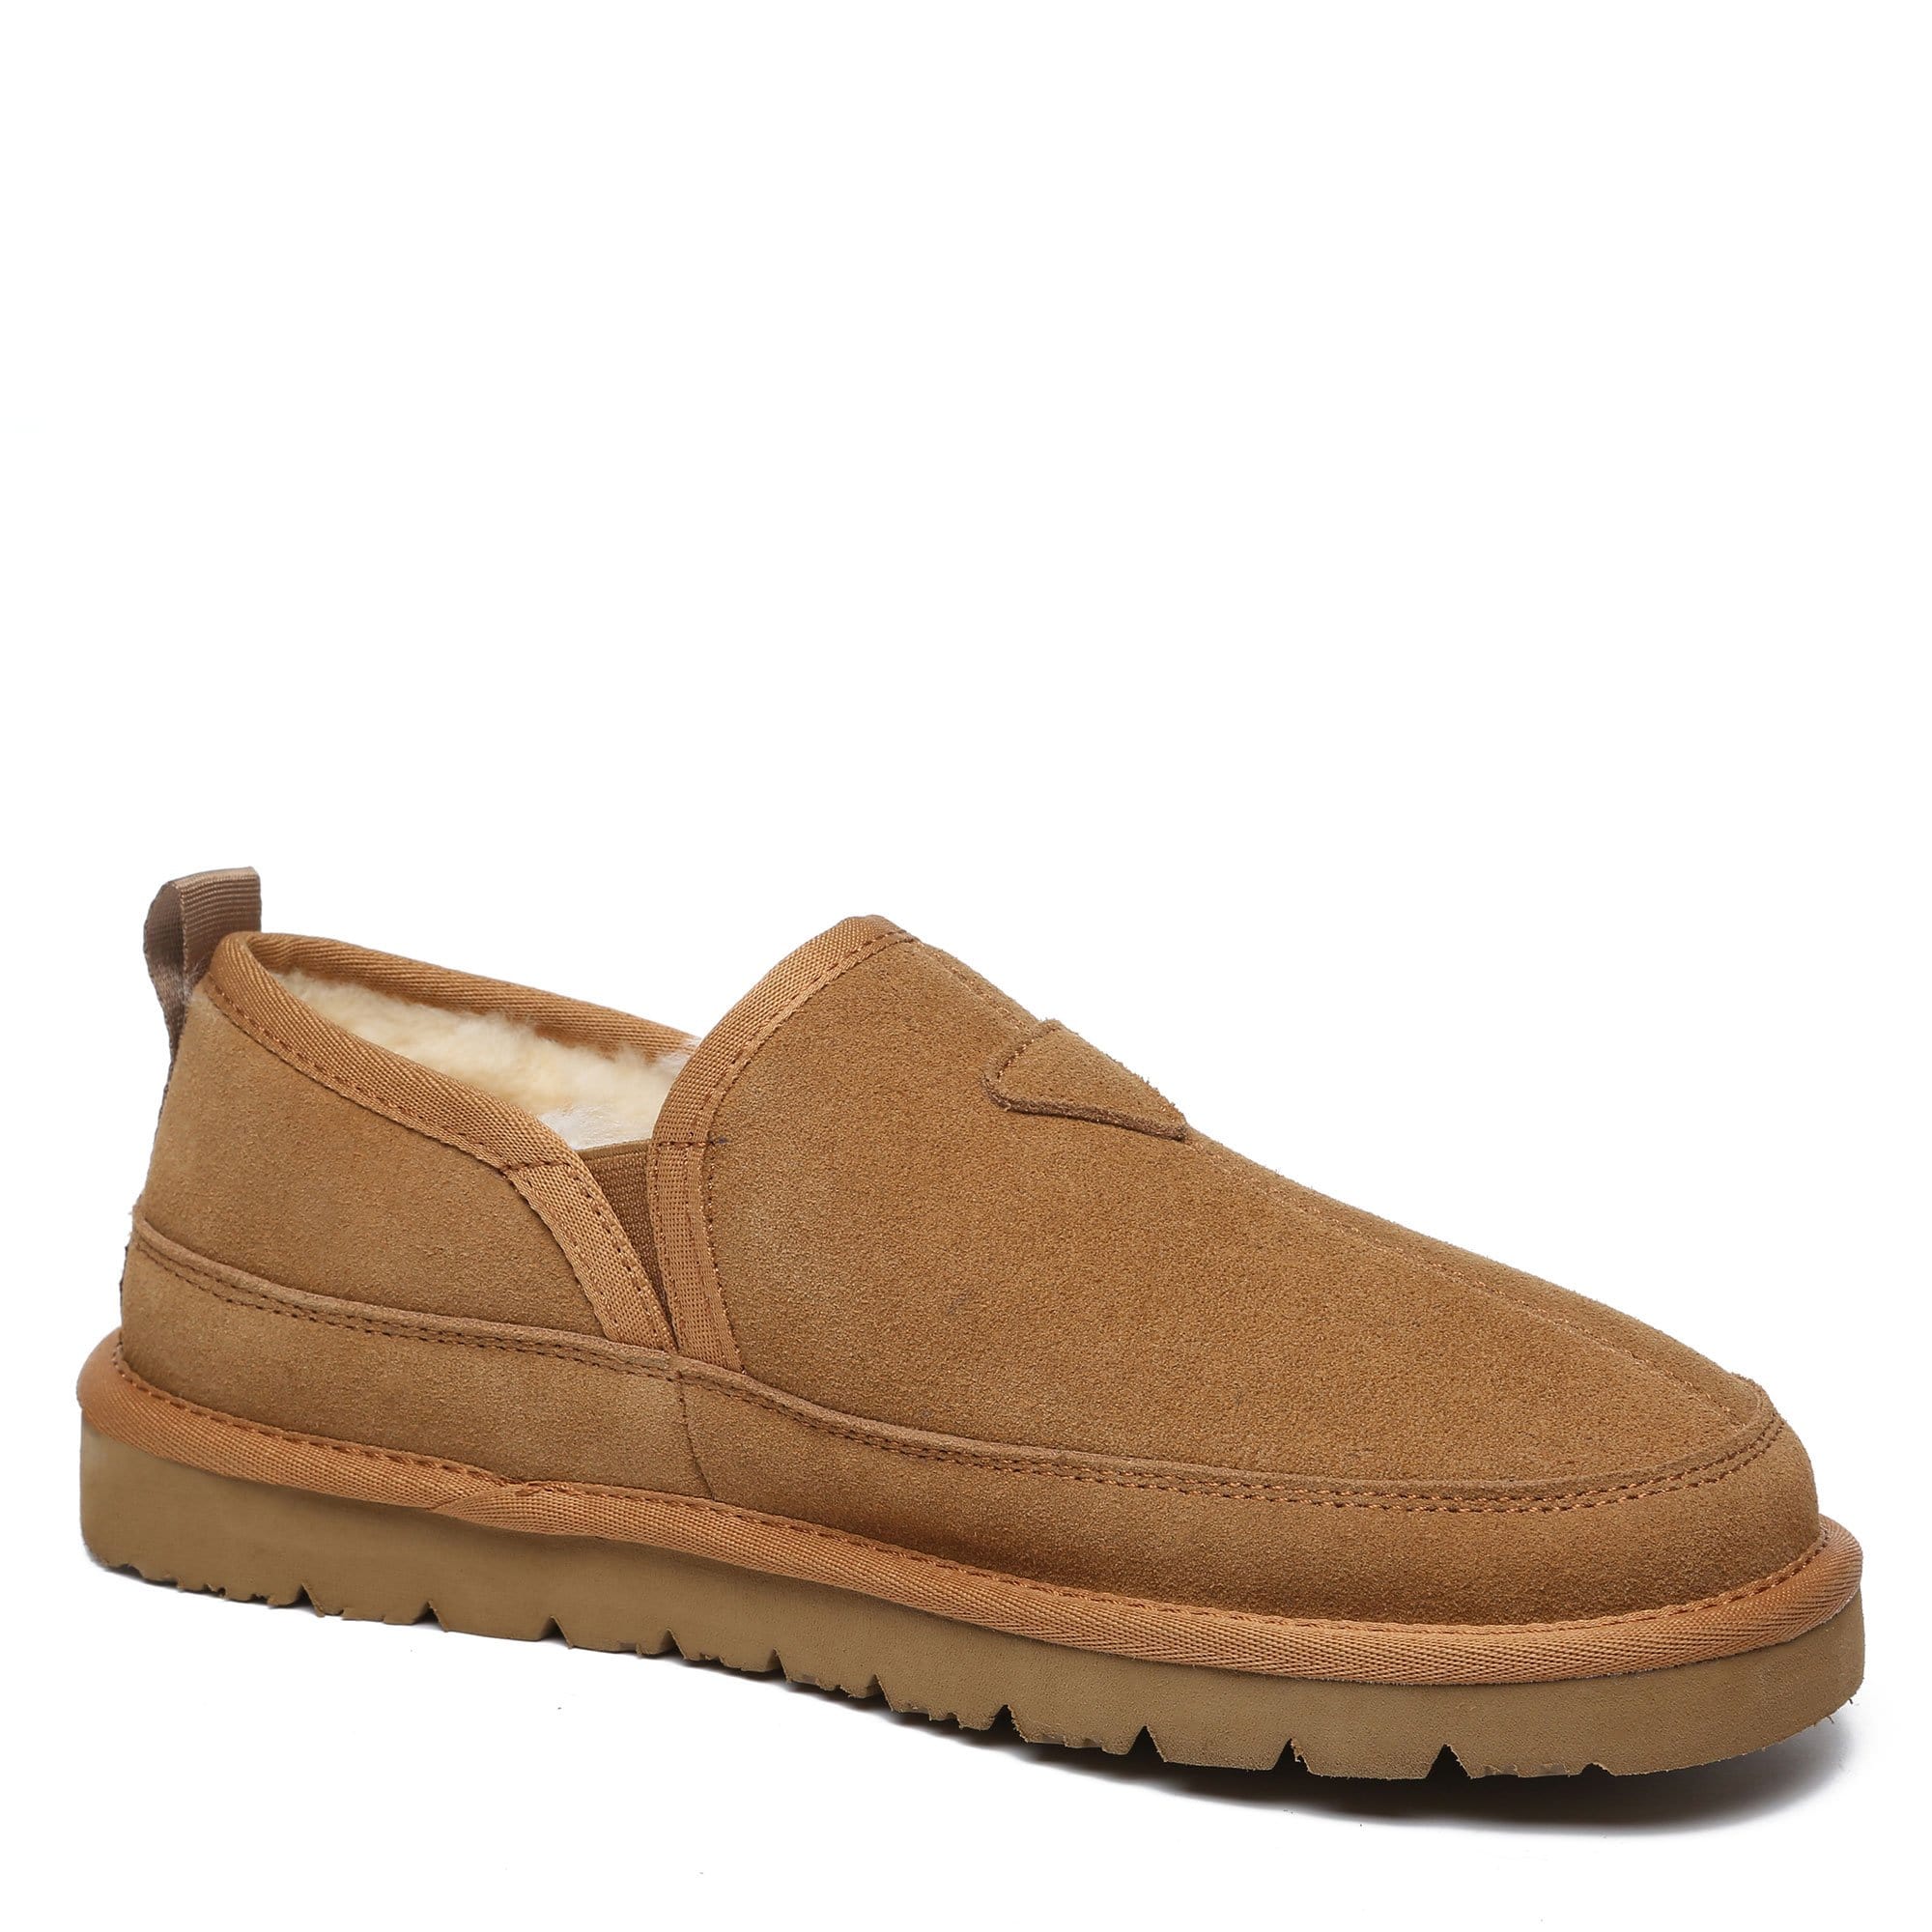 UGG Harry Moccasin Slippers